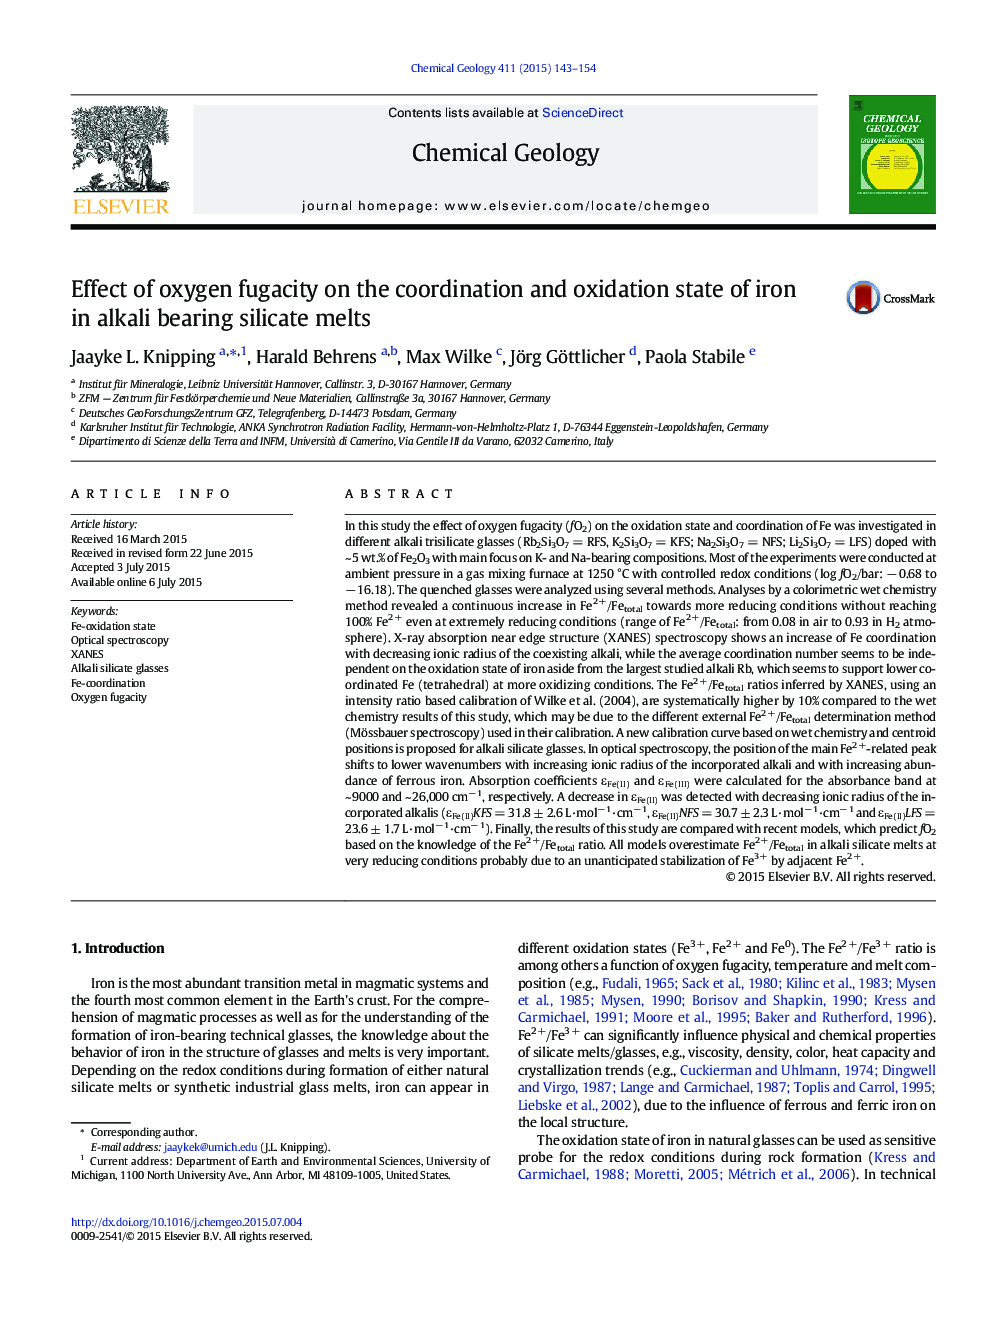 Effect of oxygen fugacity on the coordination and oxidation state of iron in alkali bearing silicate melts